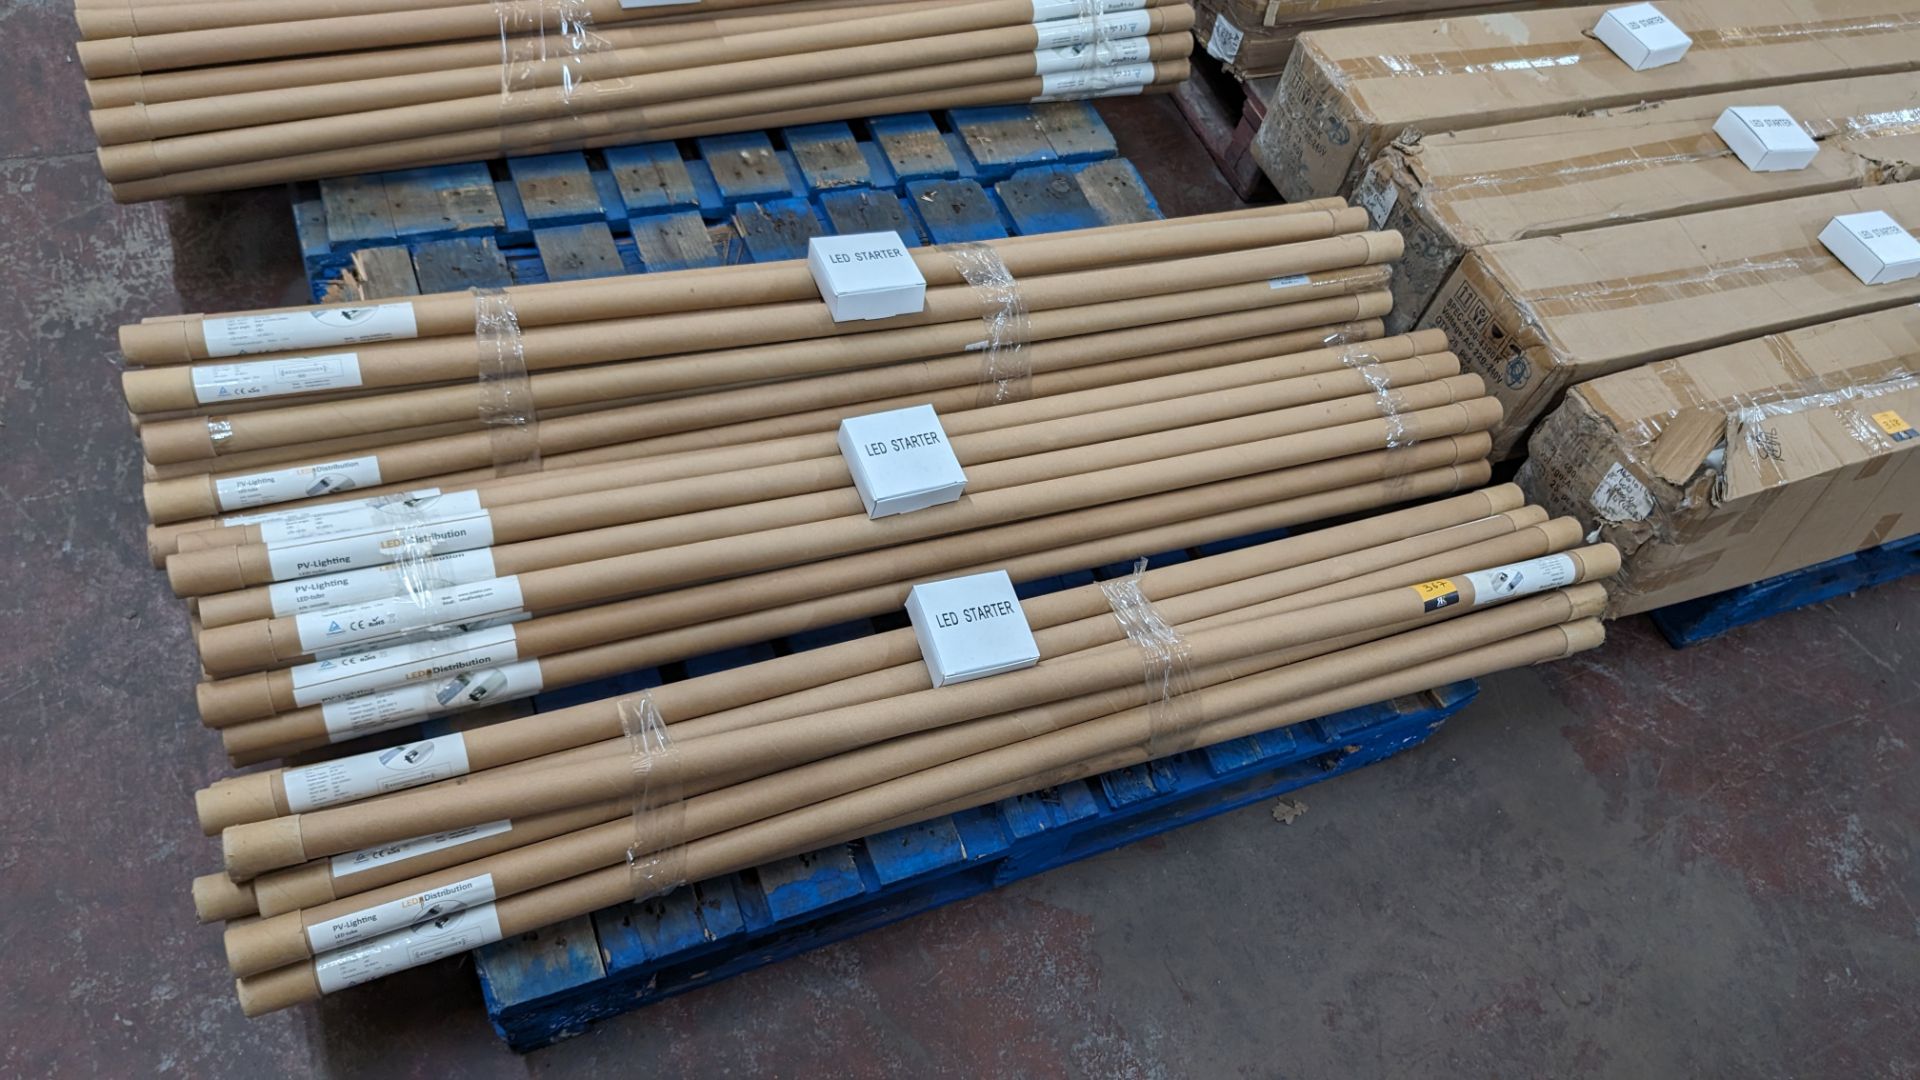 The contents of a pallet of 1500mm 30w 3600 lumens LED lighting tubes, 50,000 hours. Approximately - Image 2 of 7